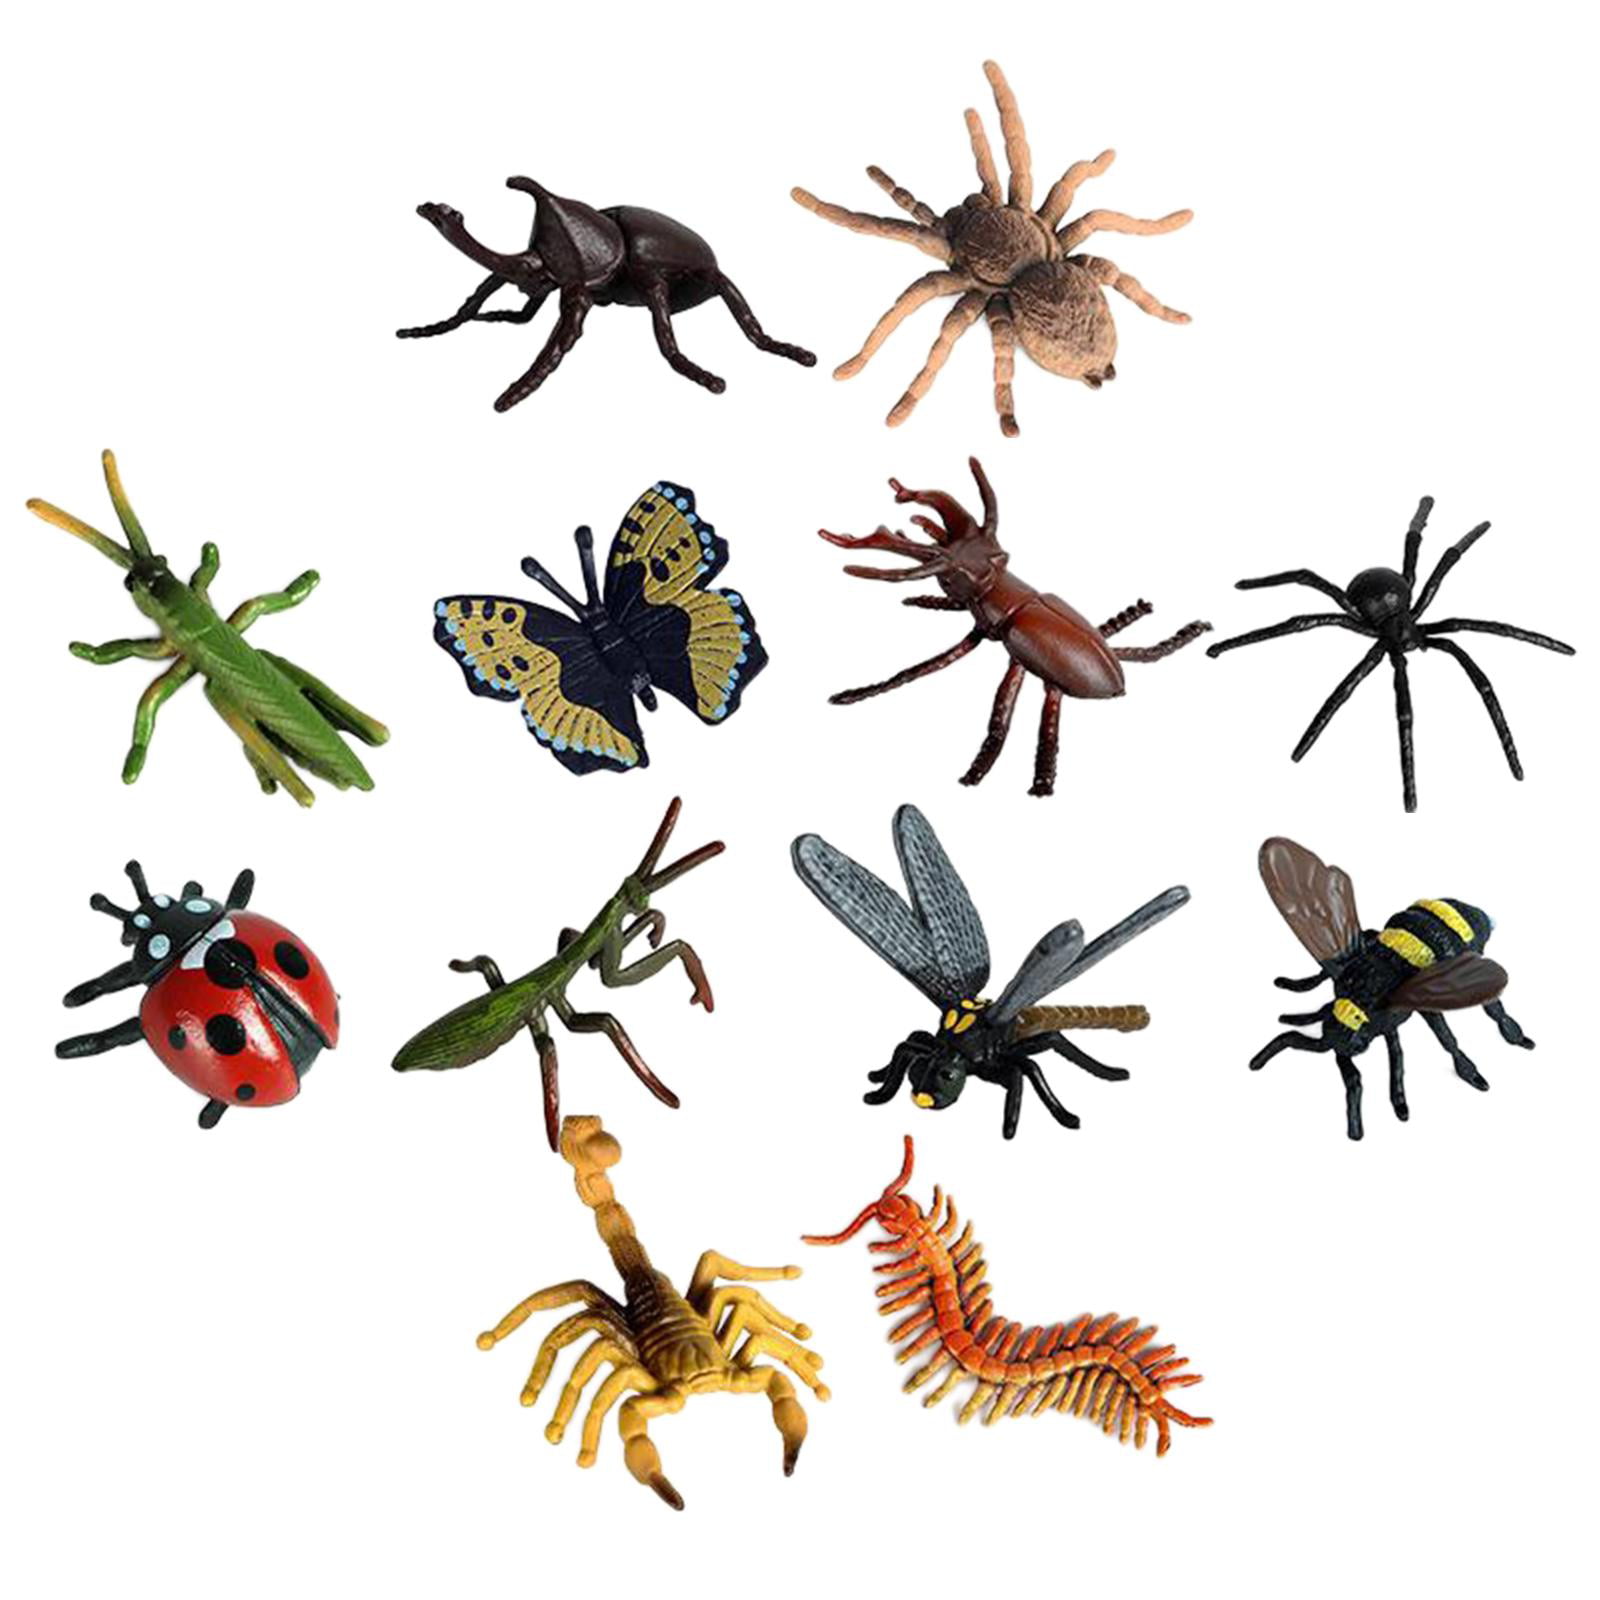 Details about   12pcs Plastic Insect Model Figures Toys Bugs Scorpion Bee Jungle Decors Gift kid 